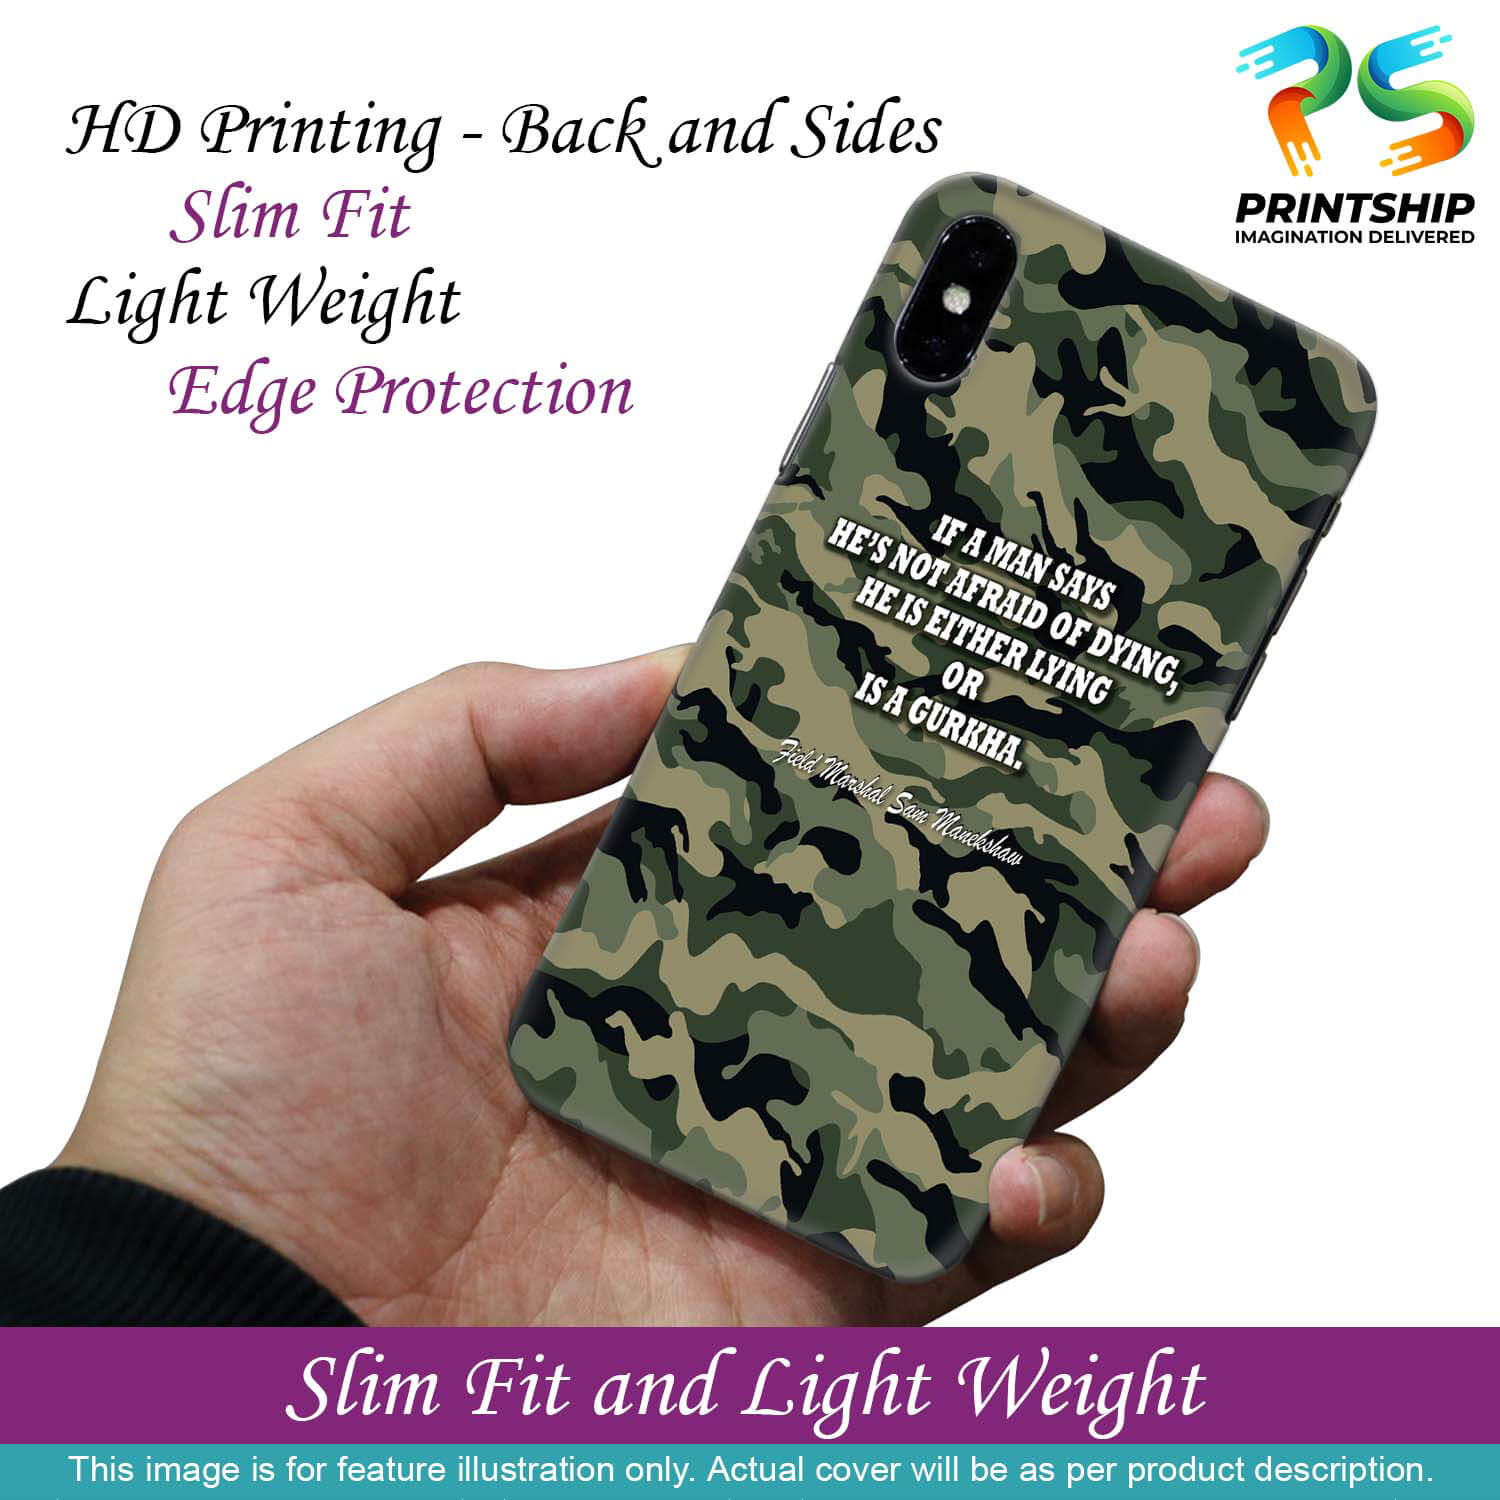 W0450-Indian Army Quote Back Cover for Samsung Galaxy A10s